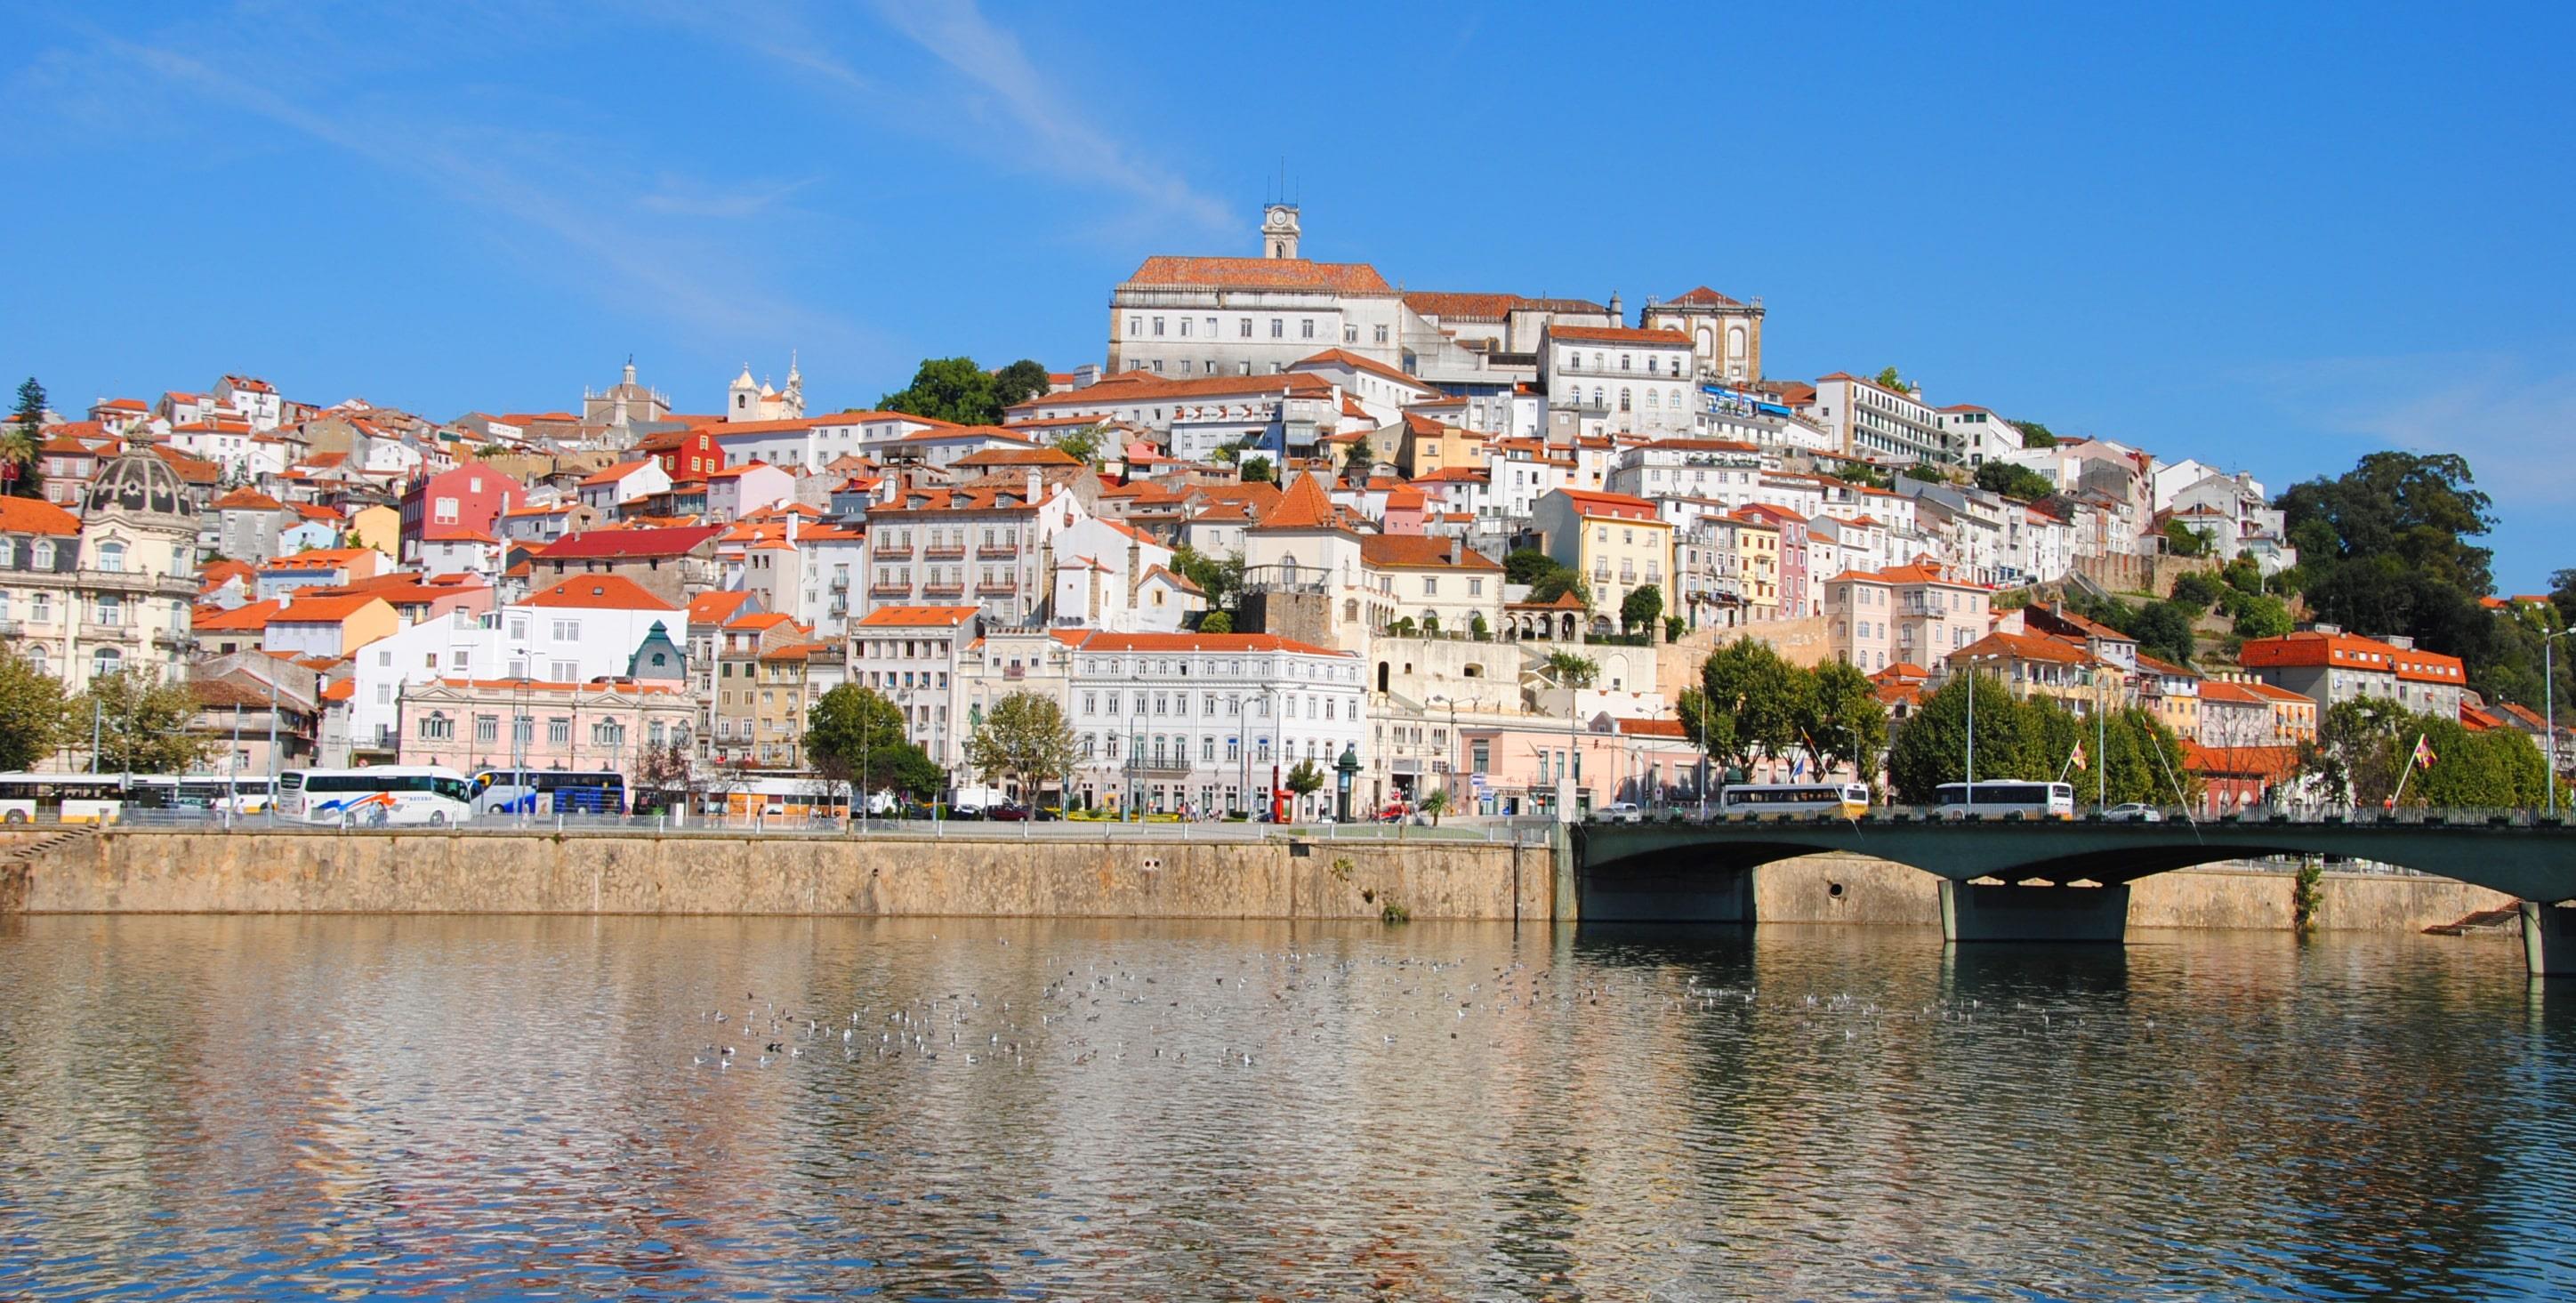 Legends and Traditions of Coimbra Free Tour